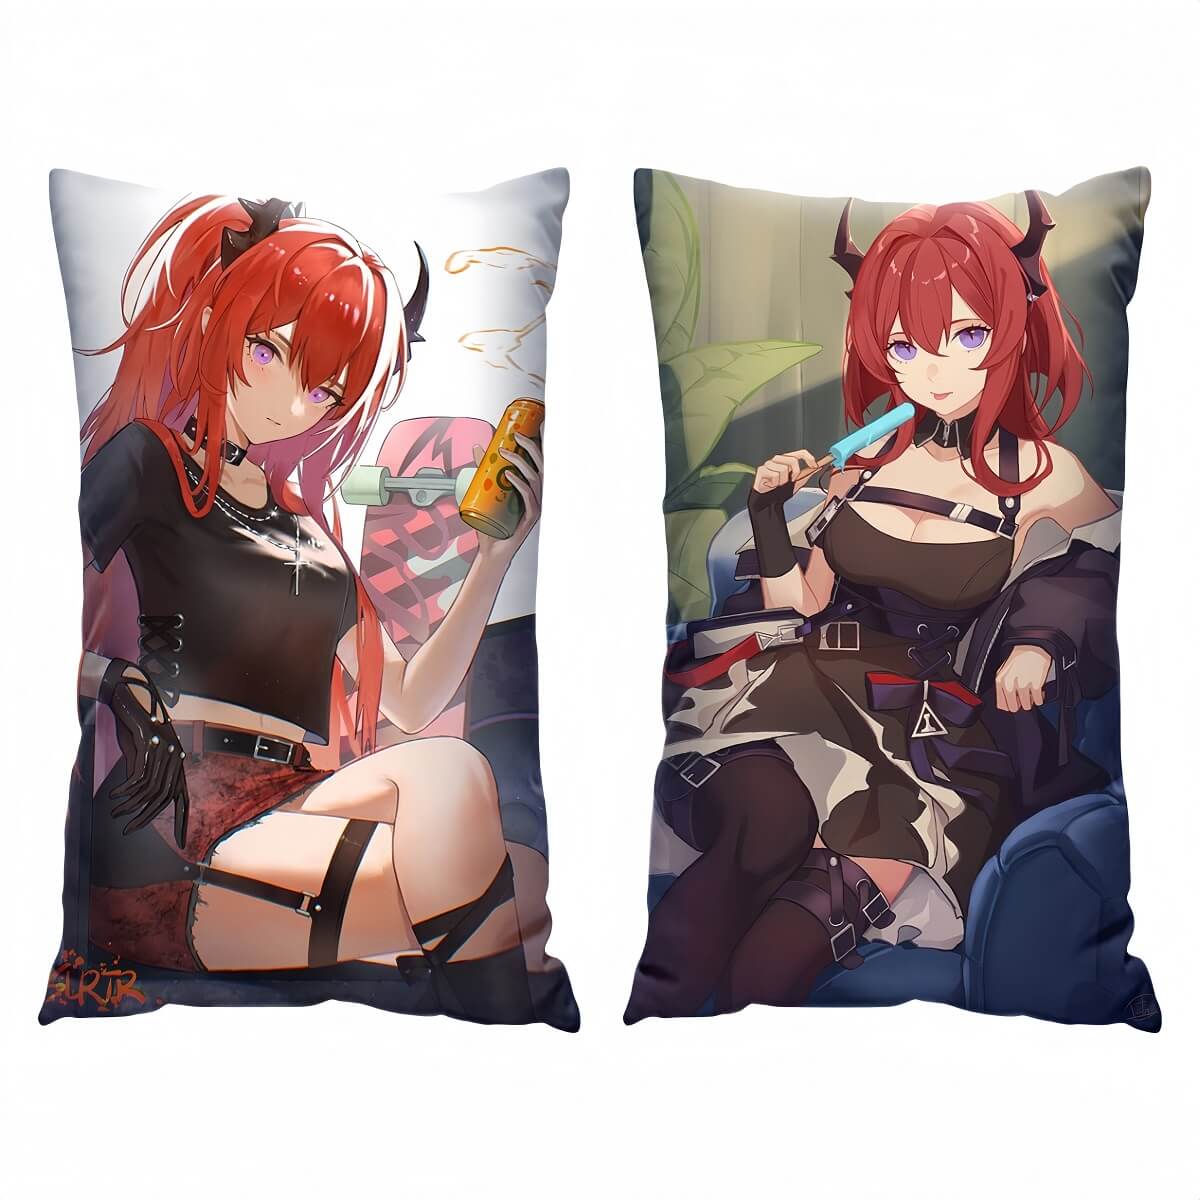 Arknights Surtr  beautifully painted pillow